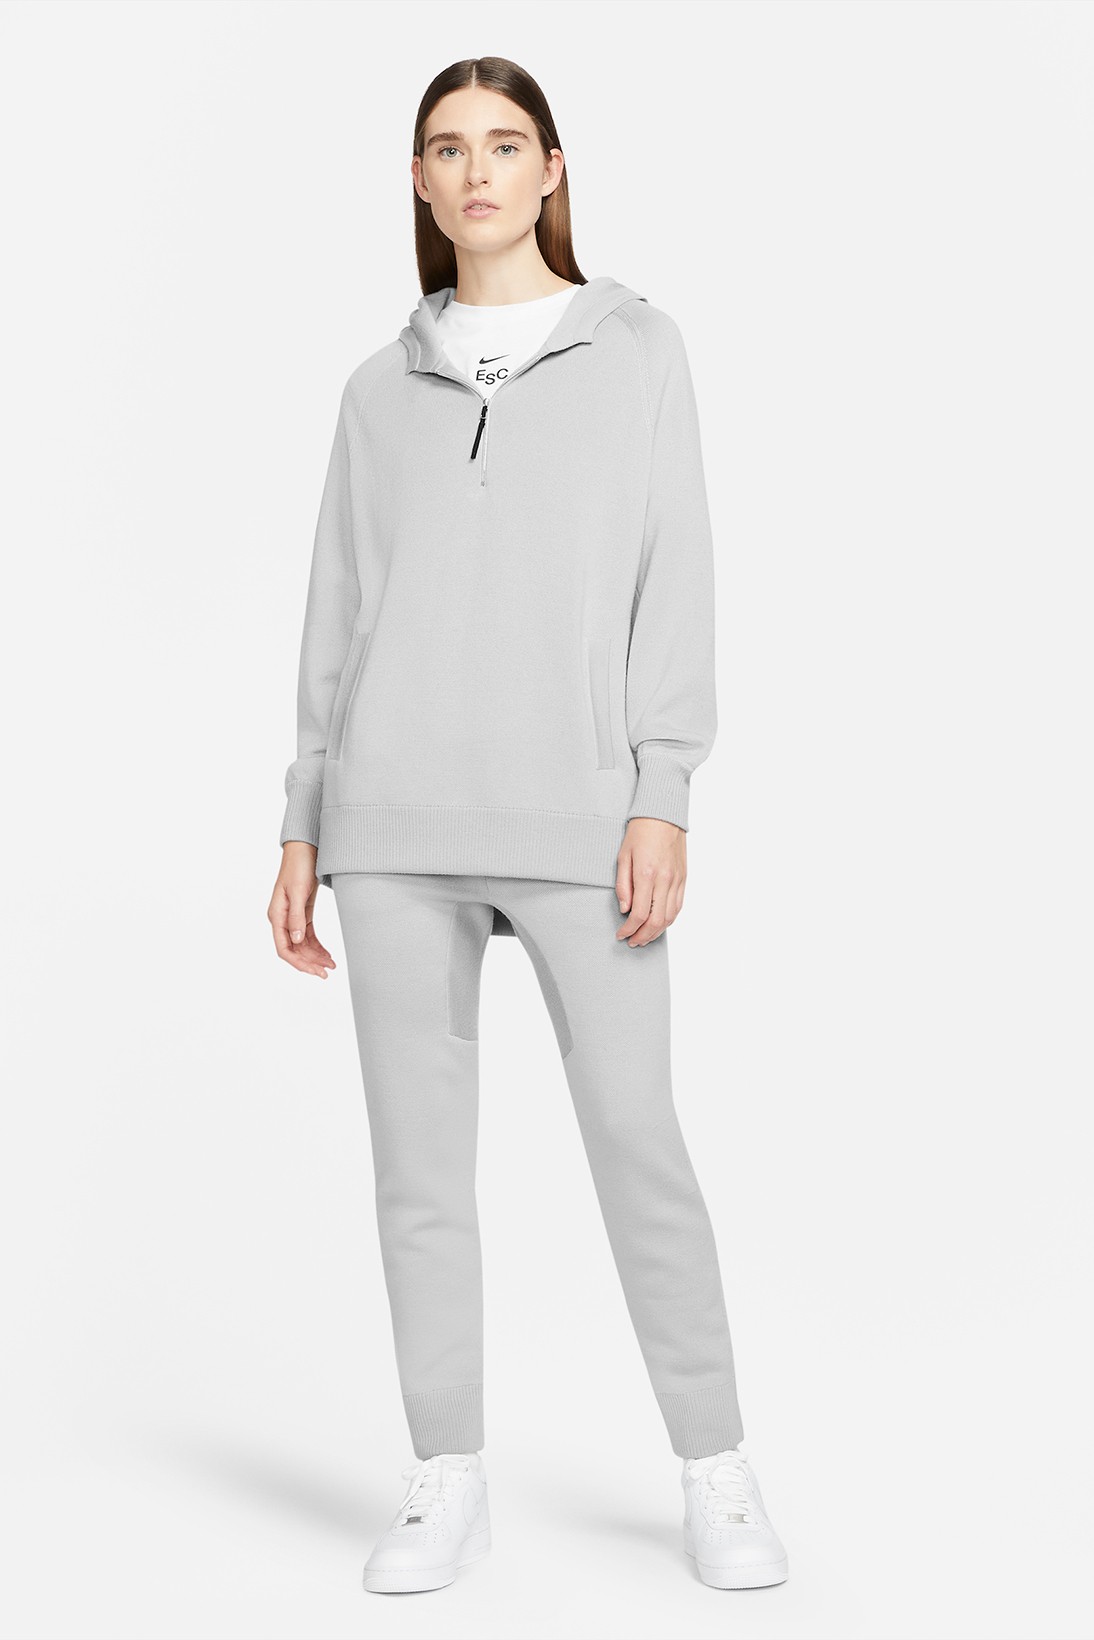 nike every stitch considered apparel sportswear spring collection outerwear jackets tees pants skirts